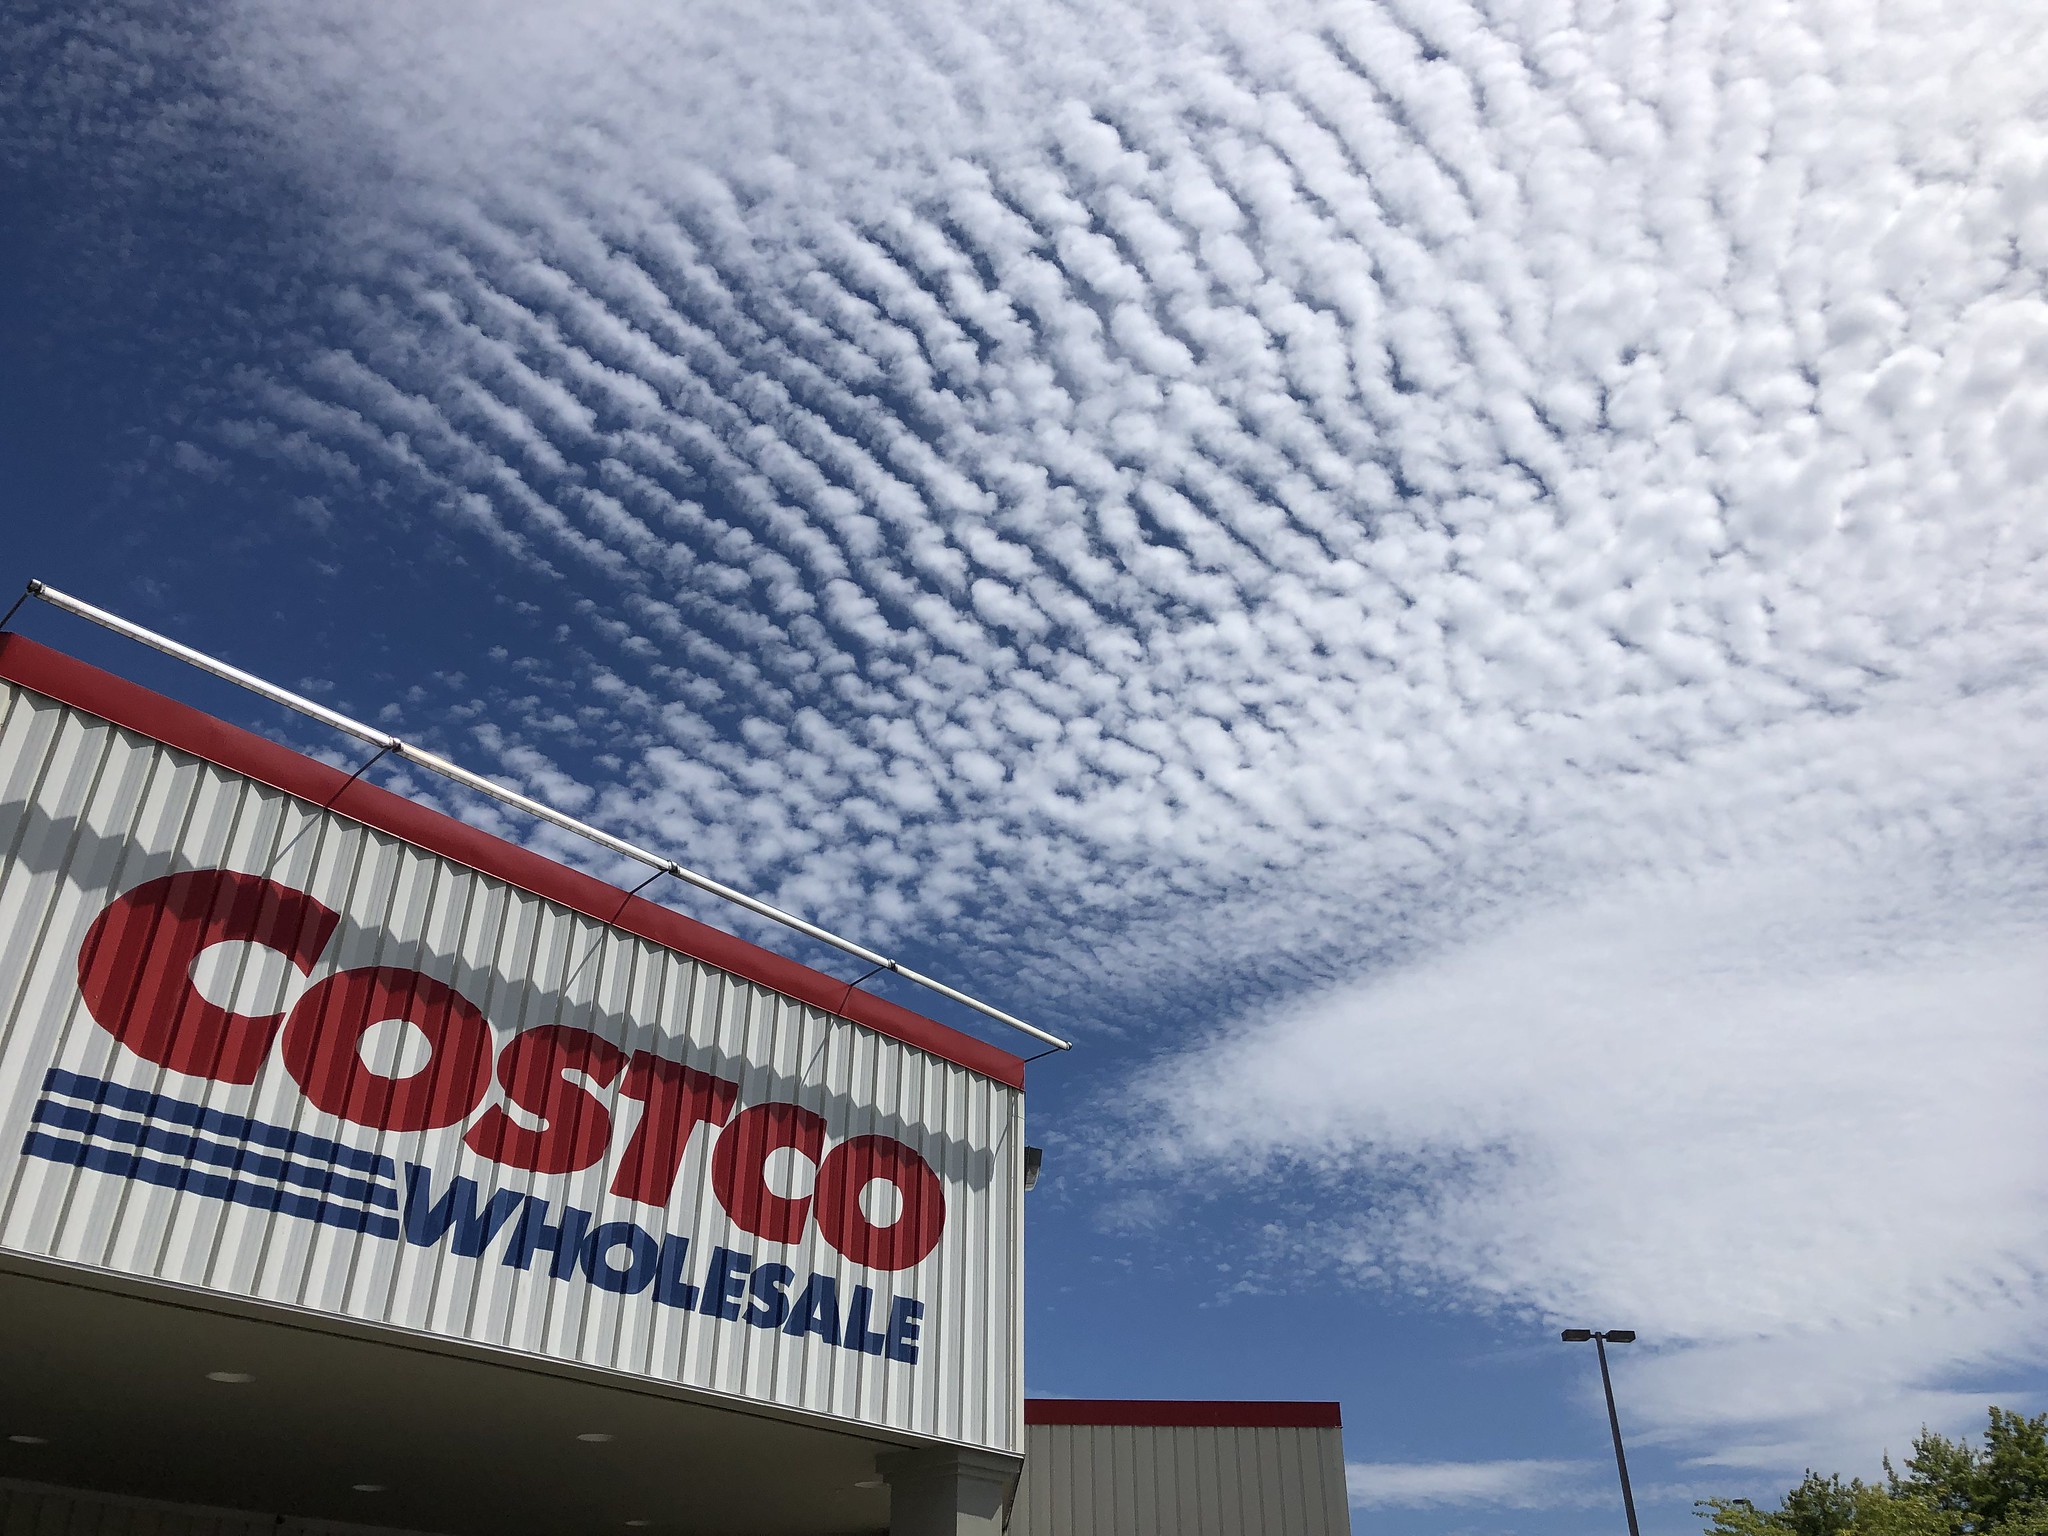 Costco closing photo centers at all store locations citing rise of camera phones and social media